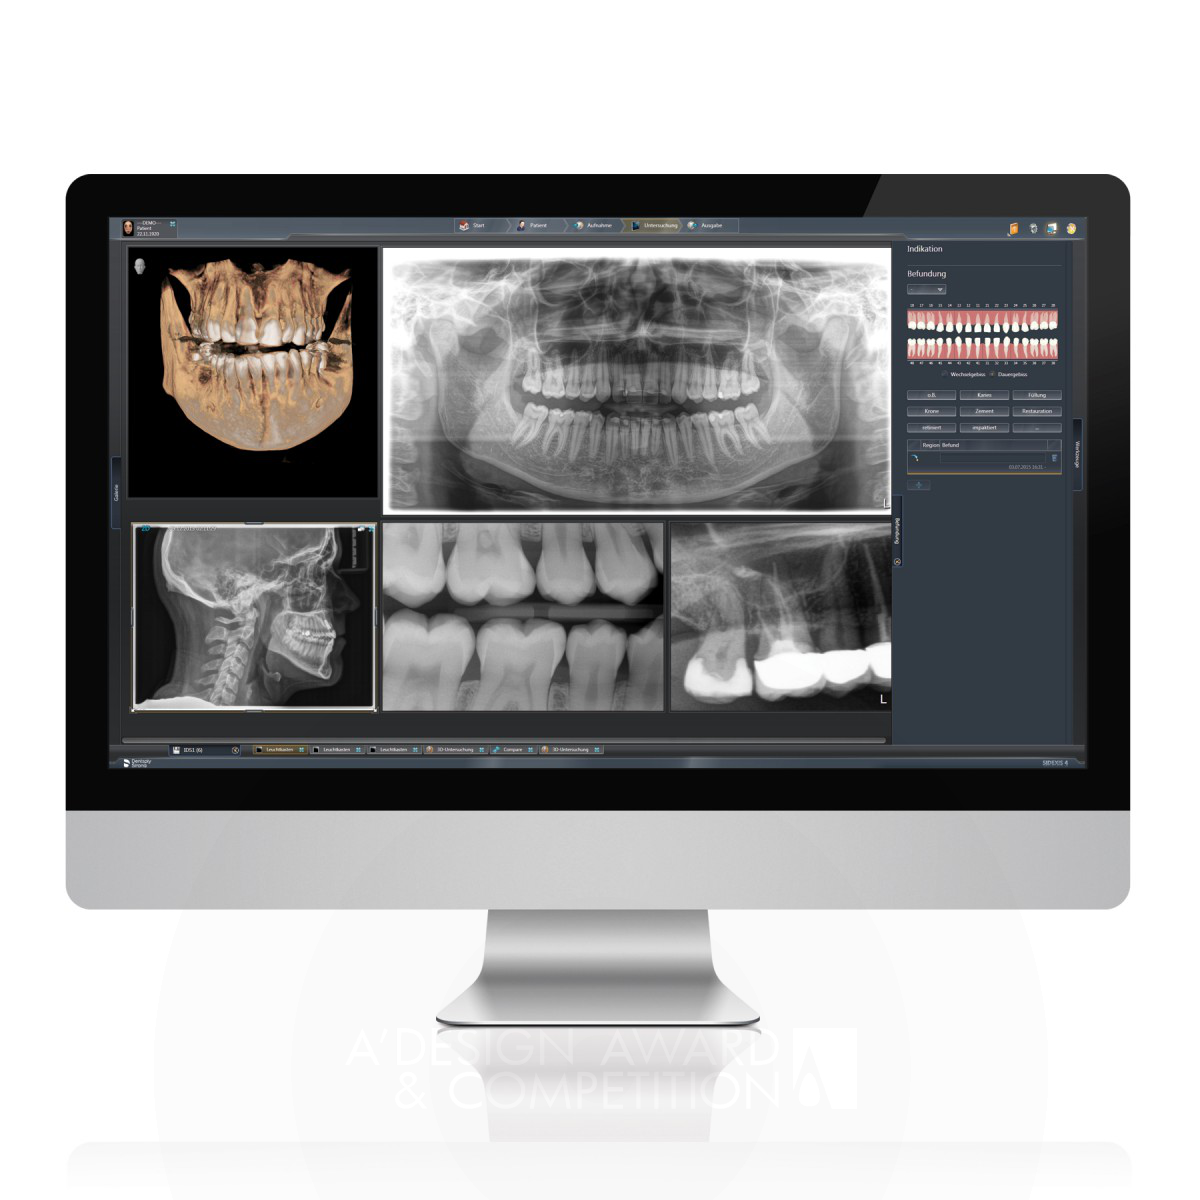 Sidexis 4 <b>Dental X-Ray Software